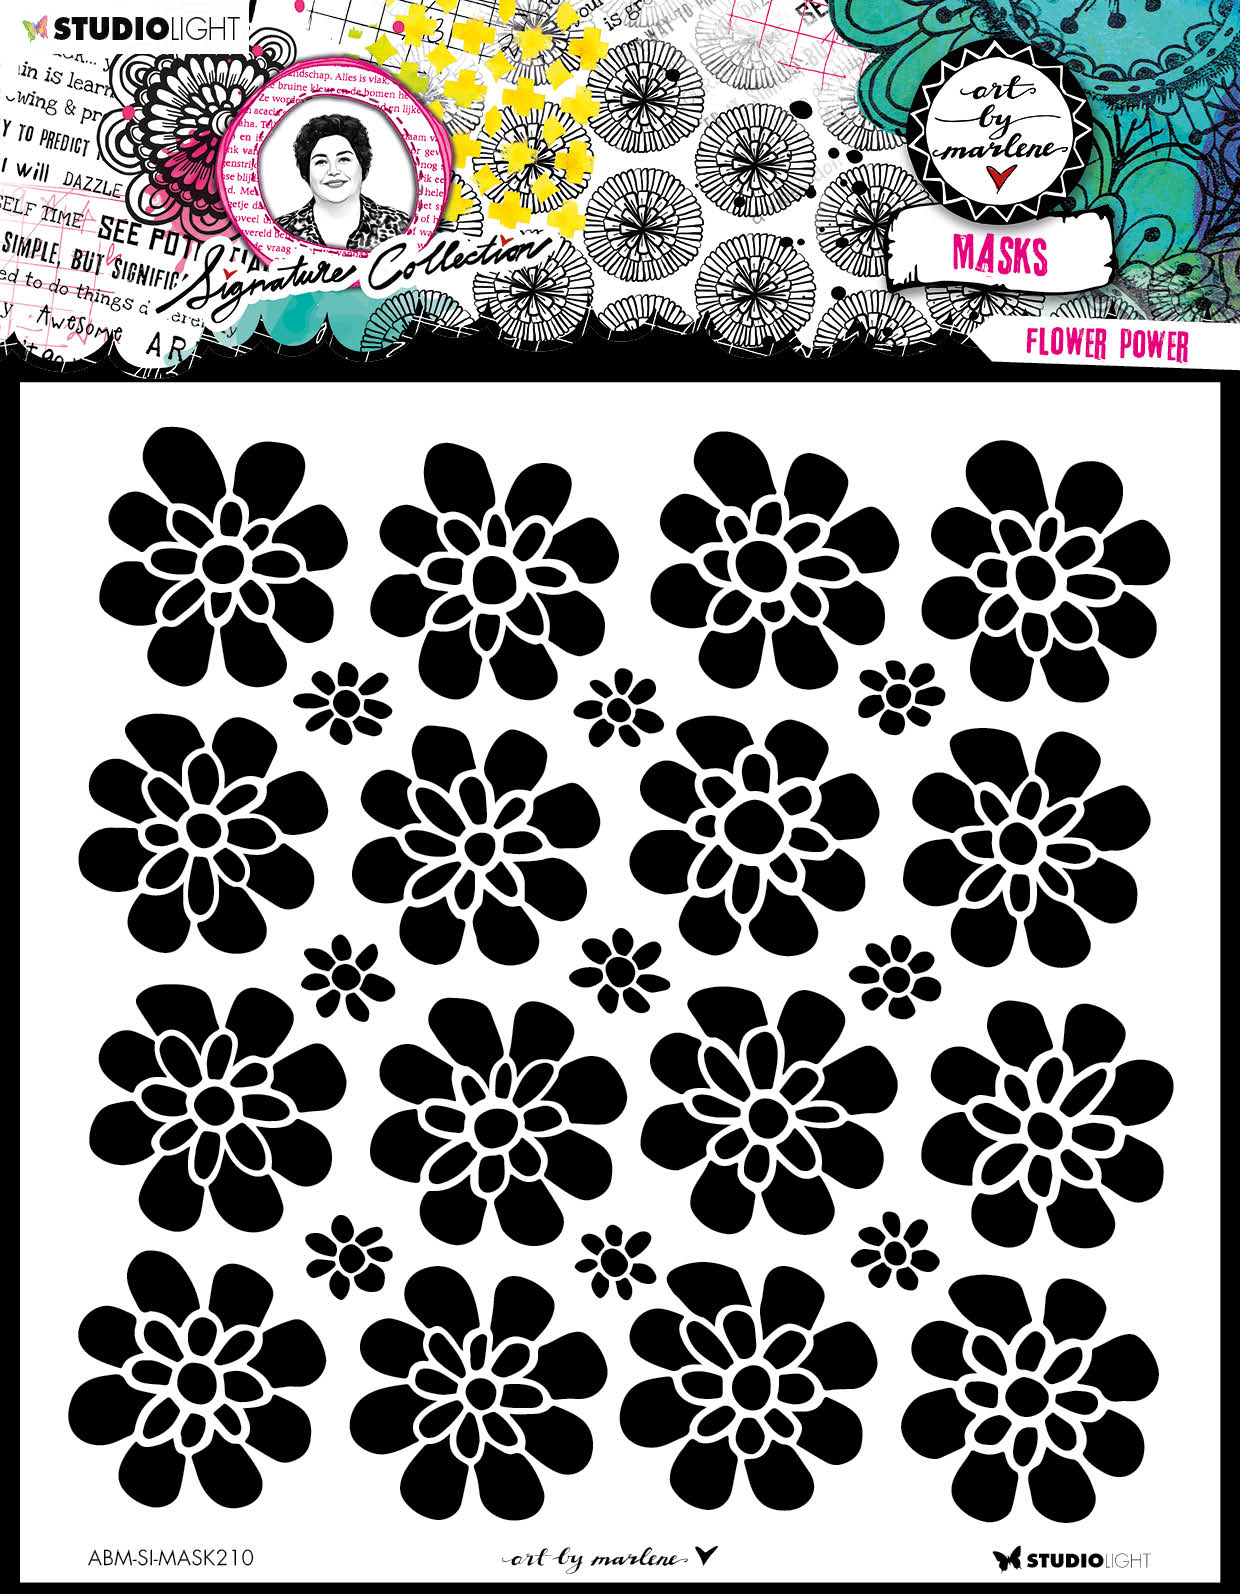 ABM Mask Flower Power Signature Collection 203.2x203.2x1mm 1 PC nr.210